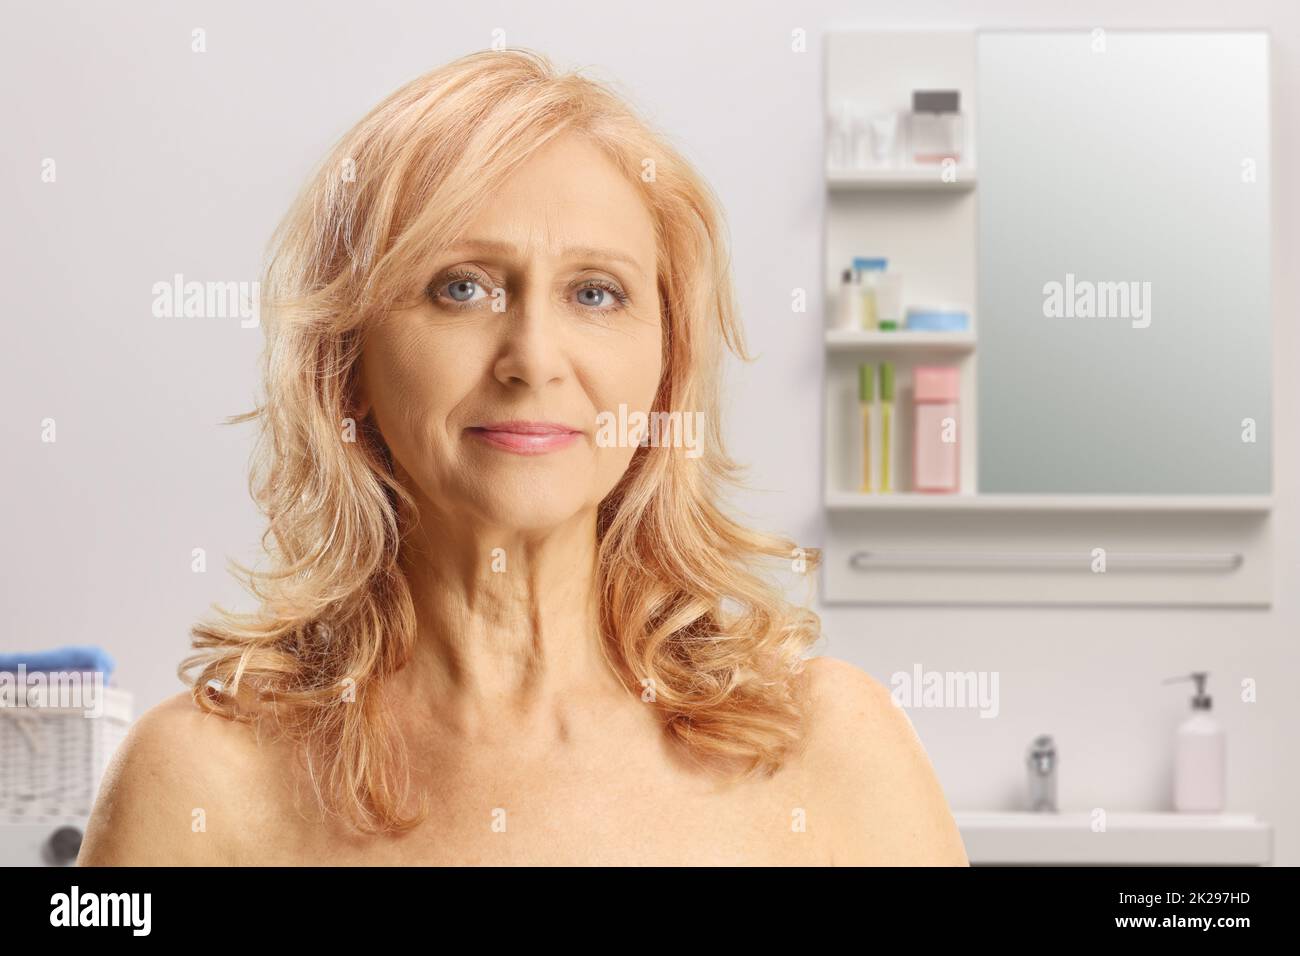 Portrait of a mature woman with blue eyes and bare shoulders inside a bathroom Stock Photo